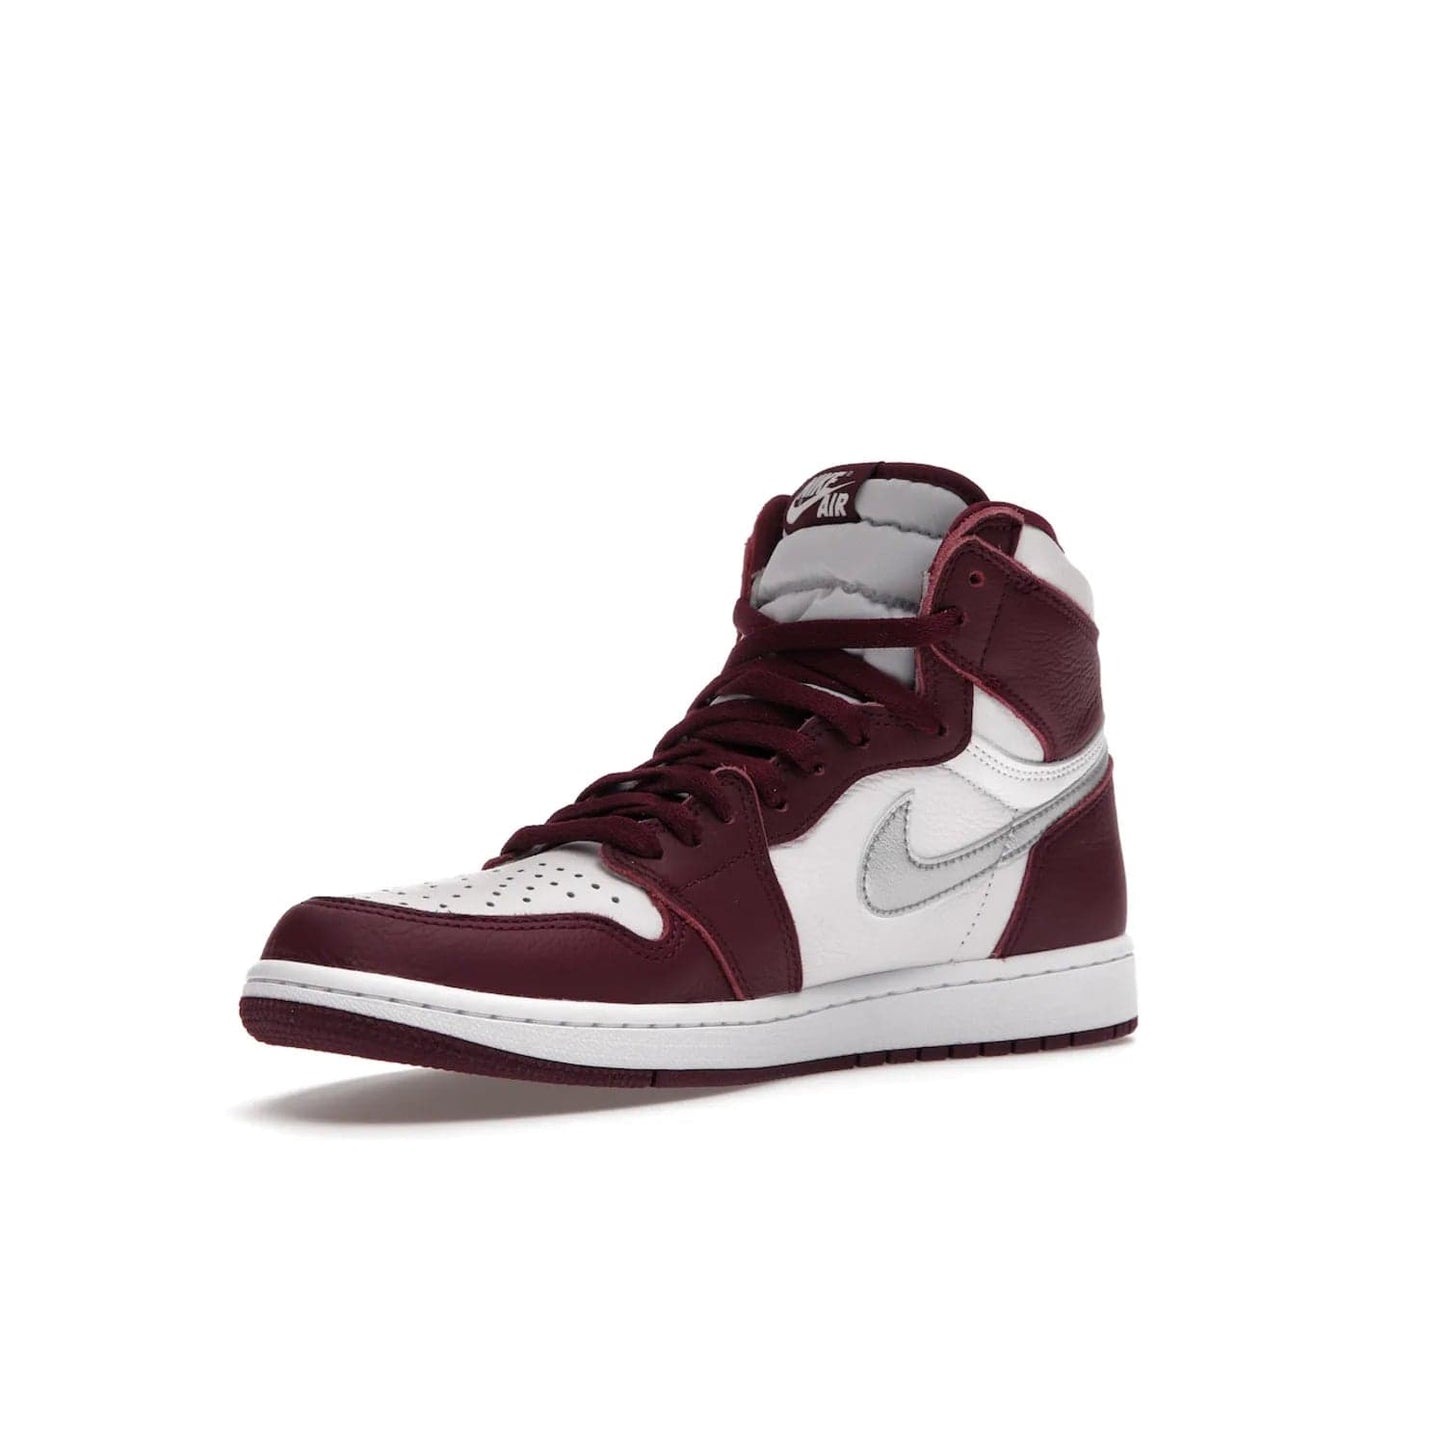 Jordan 1 Retro High OG Bordeaux - Image 15 - Only at www.BallersClubKickz.com - Shop the classic Air Jordan 1 High Bordeaux with a modern high-top cut. The timeless Bordeaux and White-Metallic Silver colorway, releasing Nov 20, 2021, is perfect for practice or a night out.